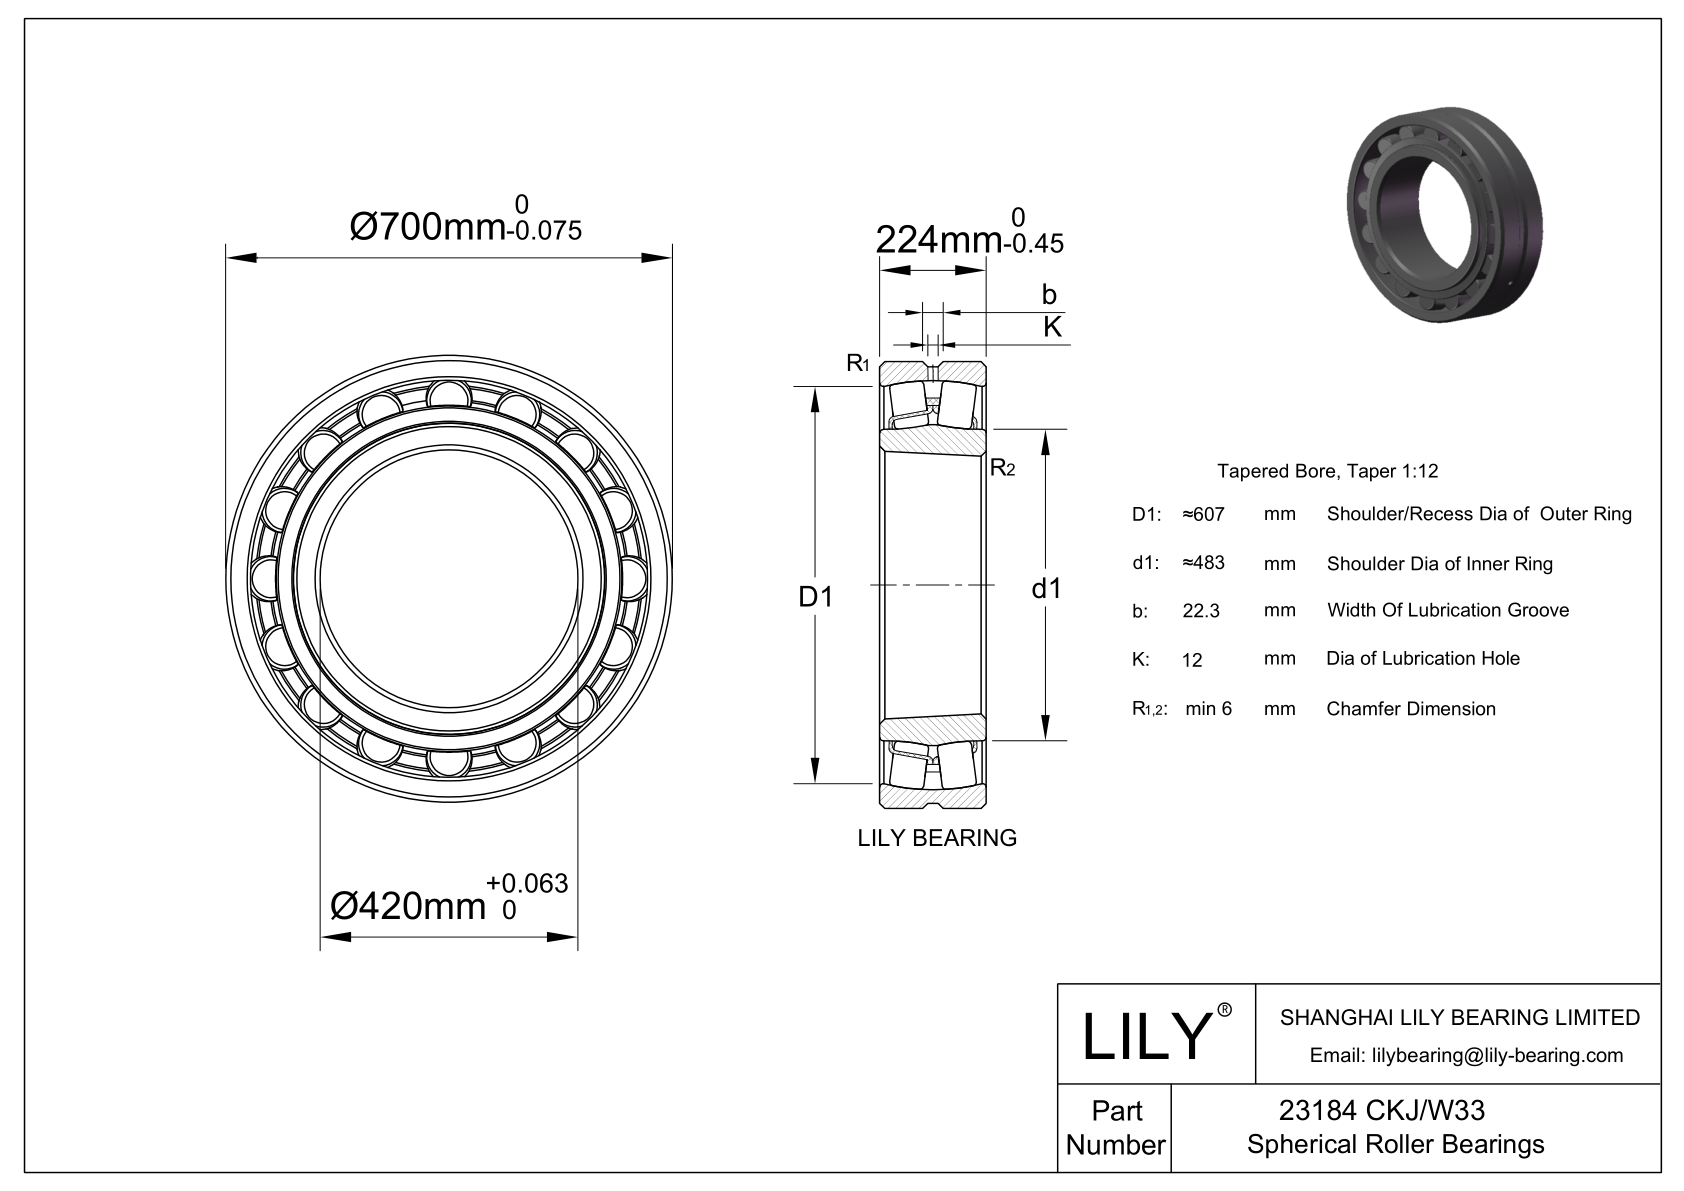 23184 CKJ/W33 Double Row Spherical Roller Bearing cad drawing